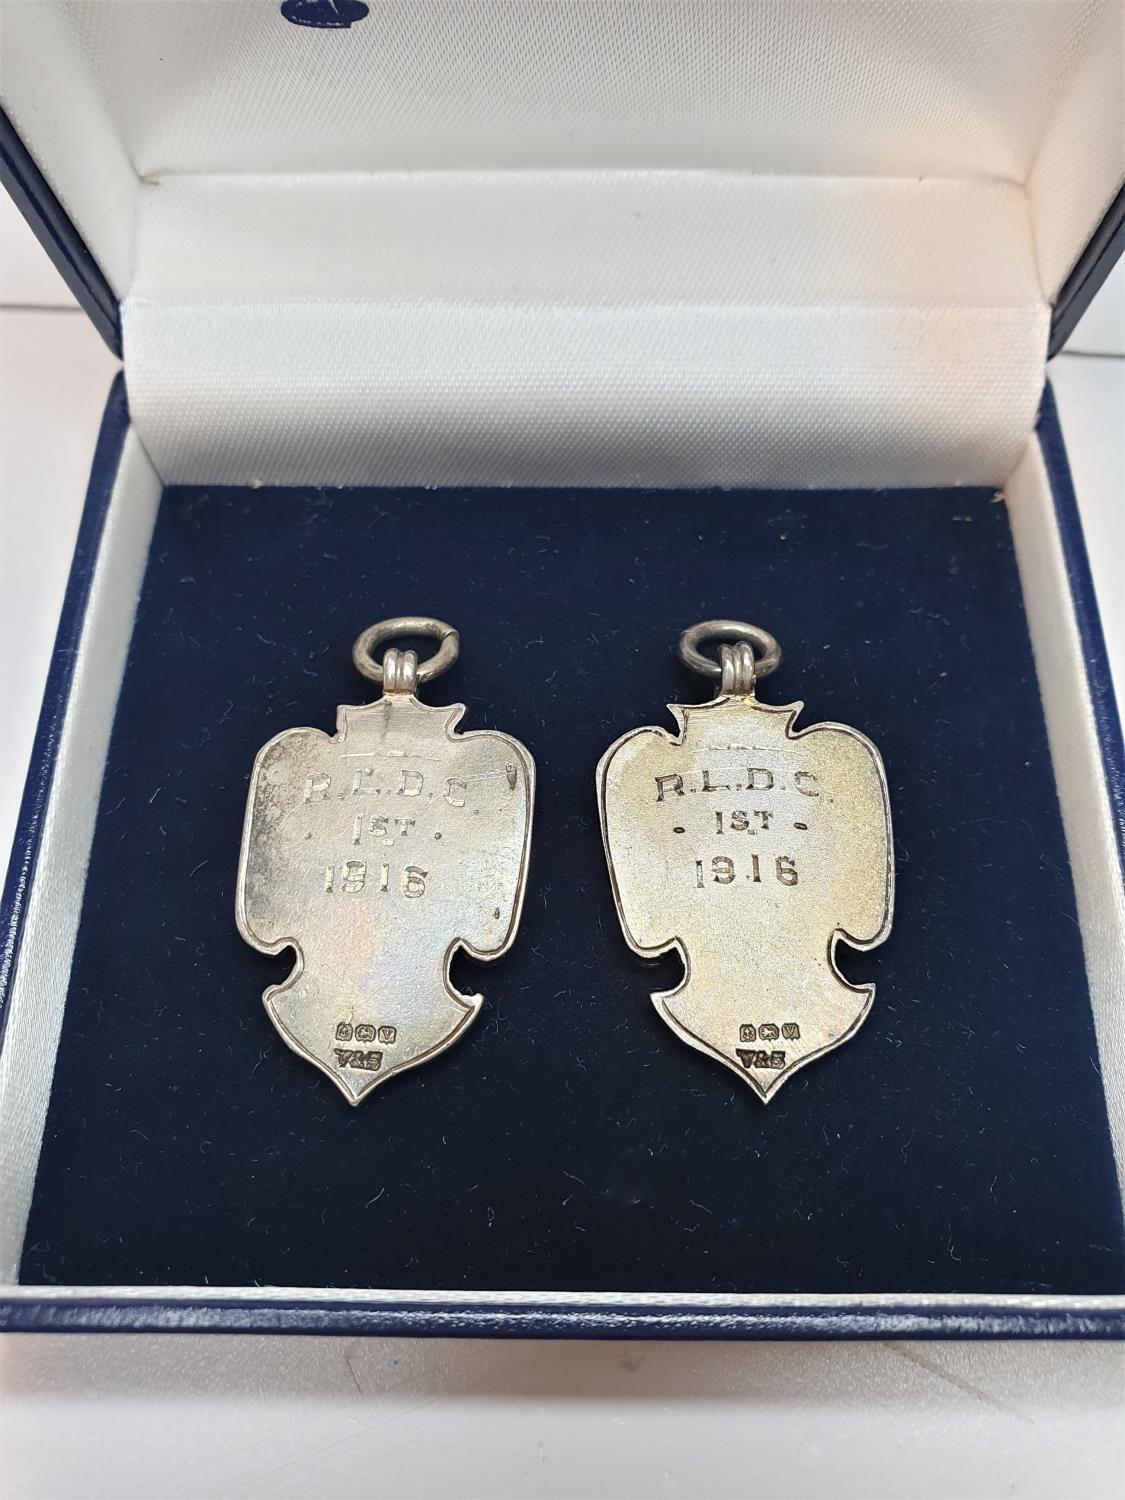 Pair of 1916 Silver Watch Chain Fobs, weight 24.6g - Image 2 of 4